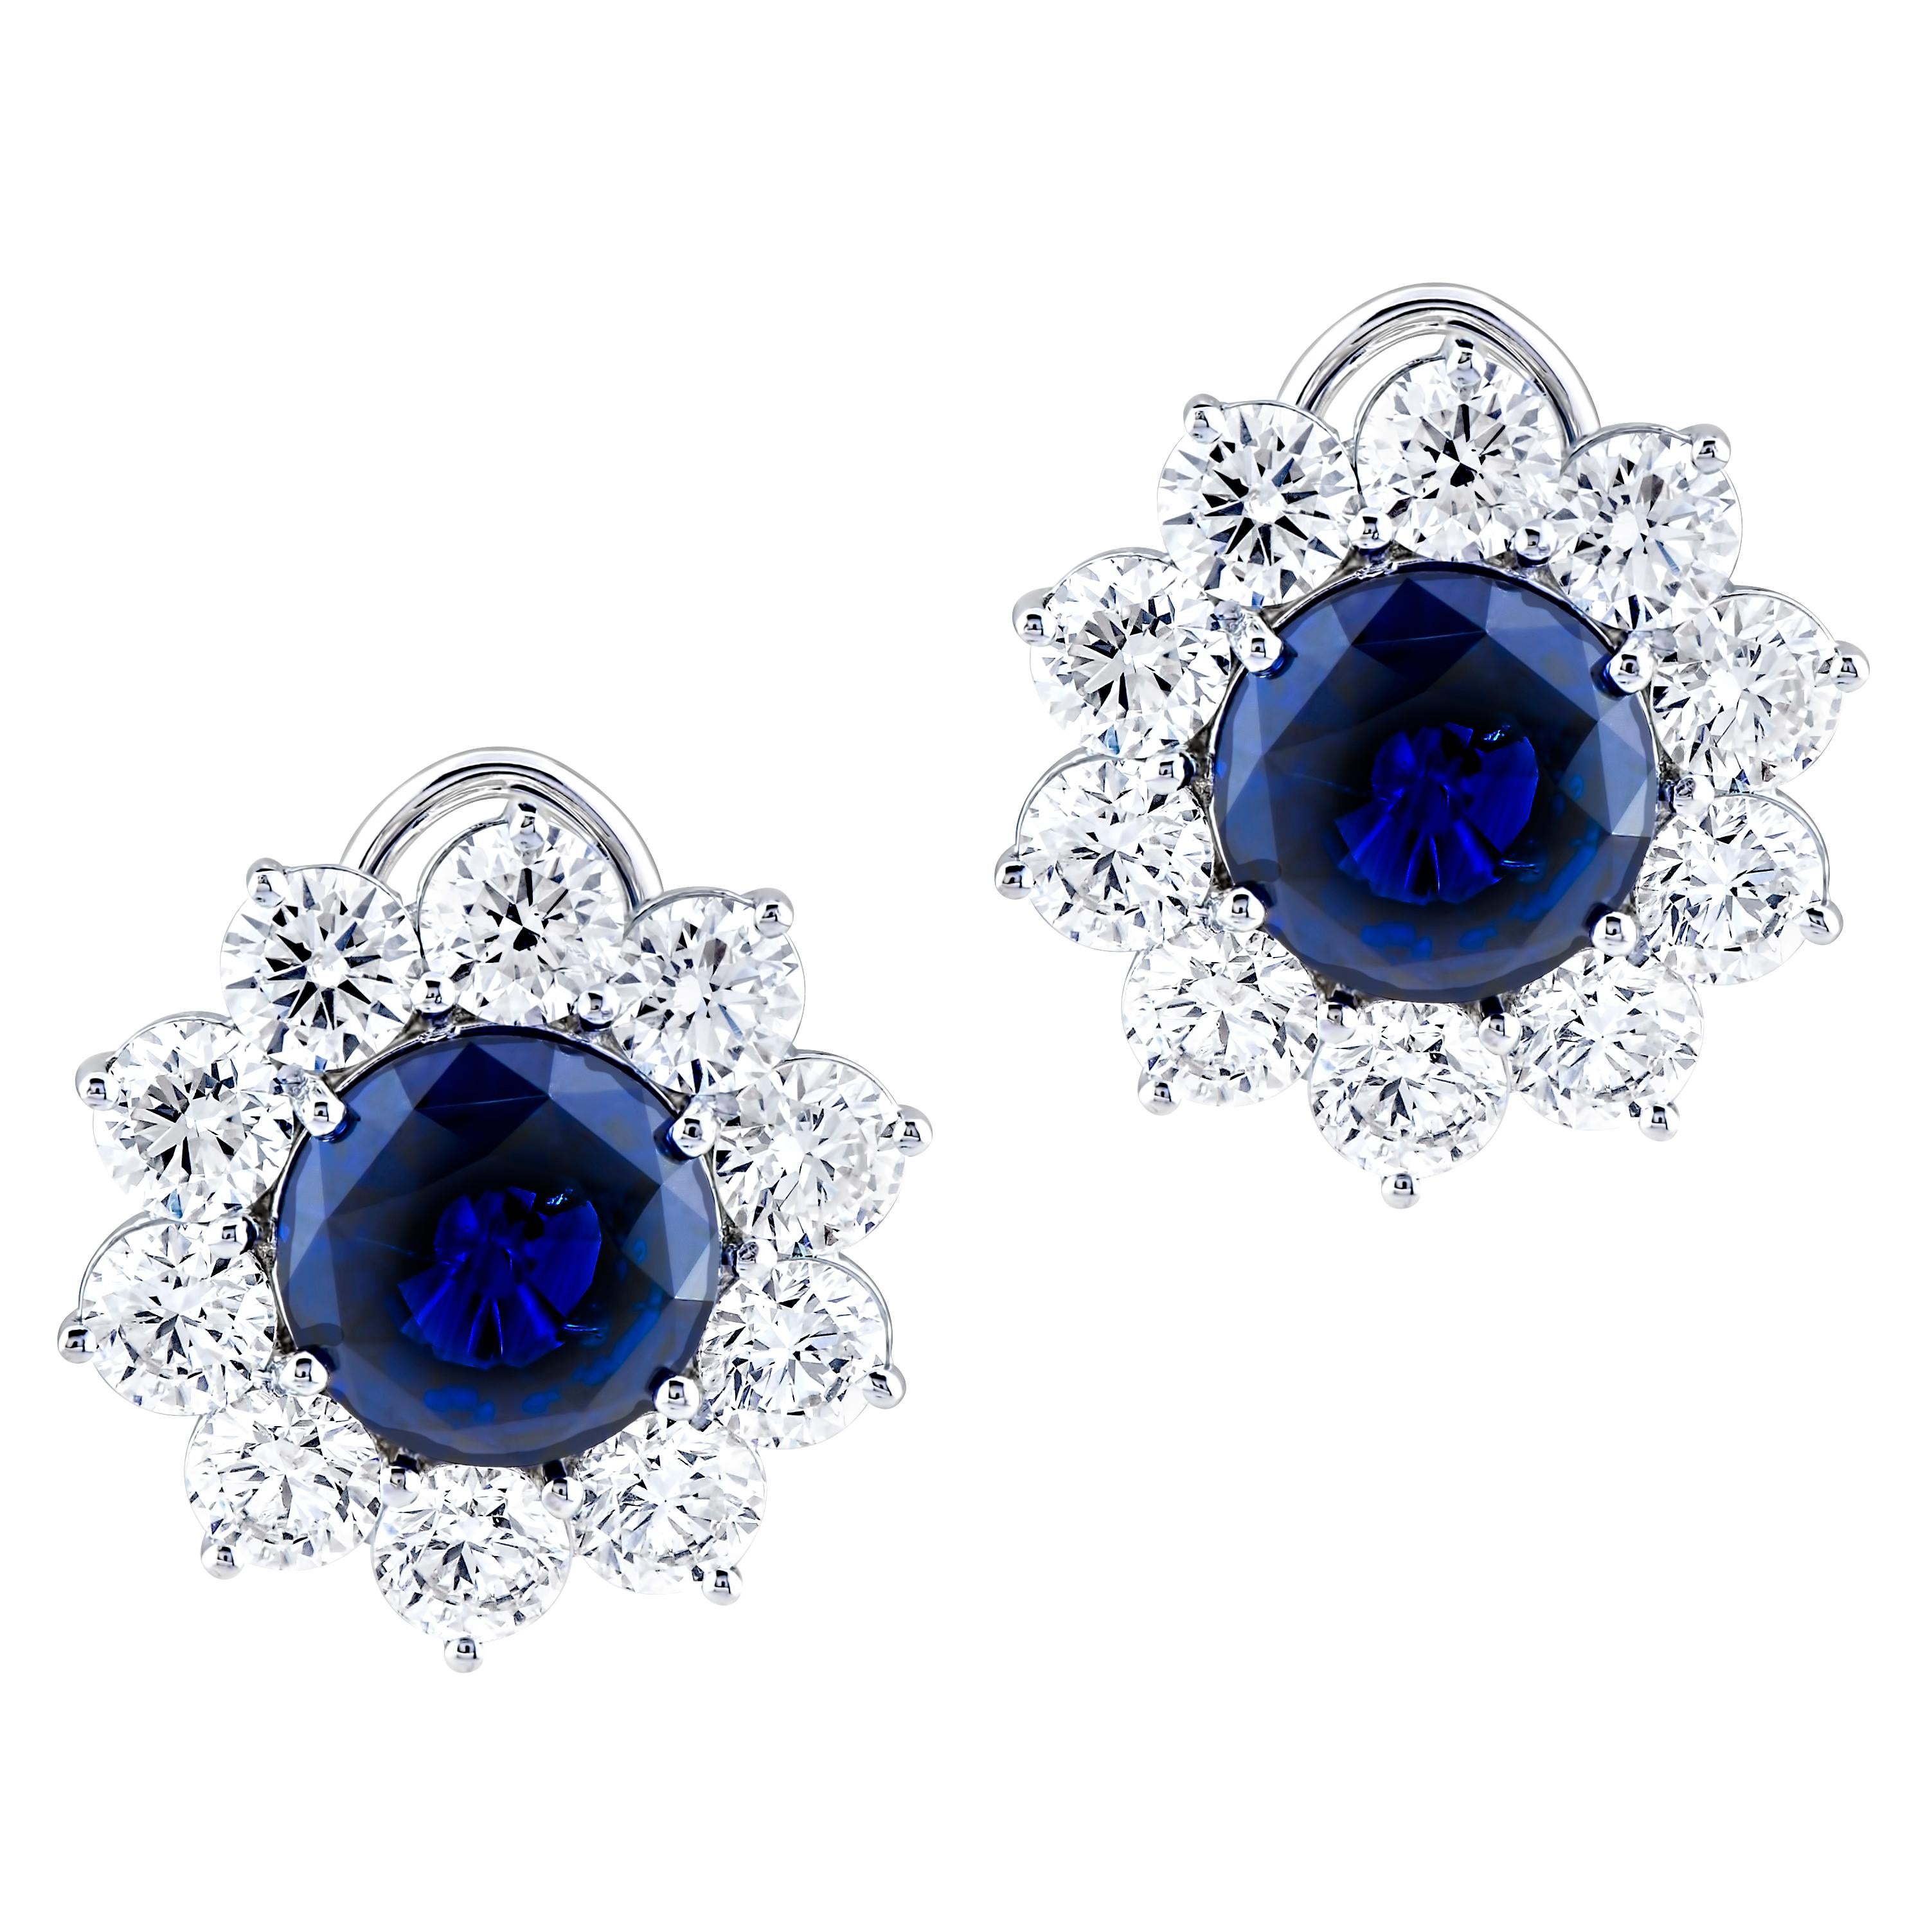 10.01 Carat Blue Sapphire Stud Earrings with 8.3 Carat Total Weight Diamonds